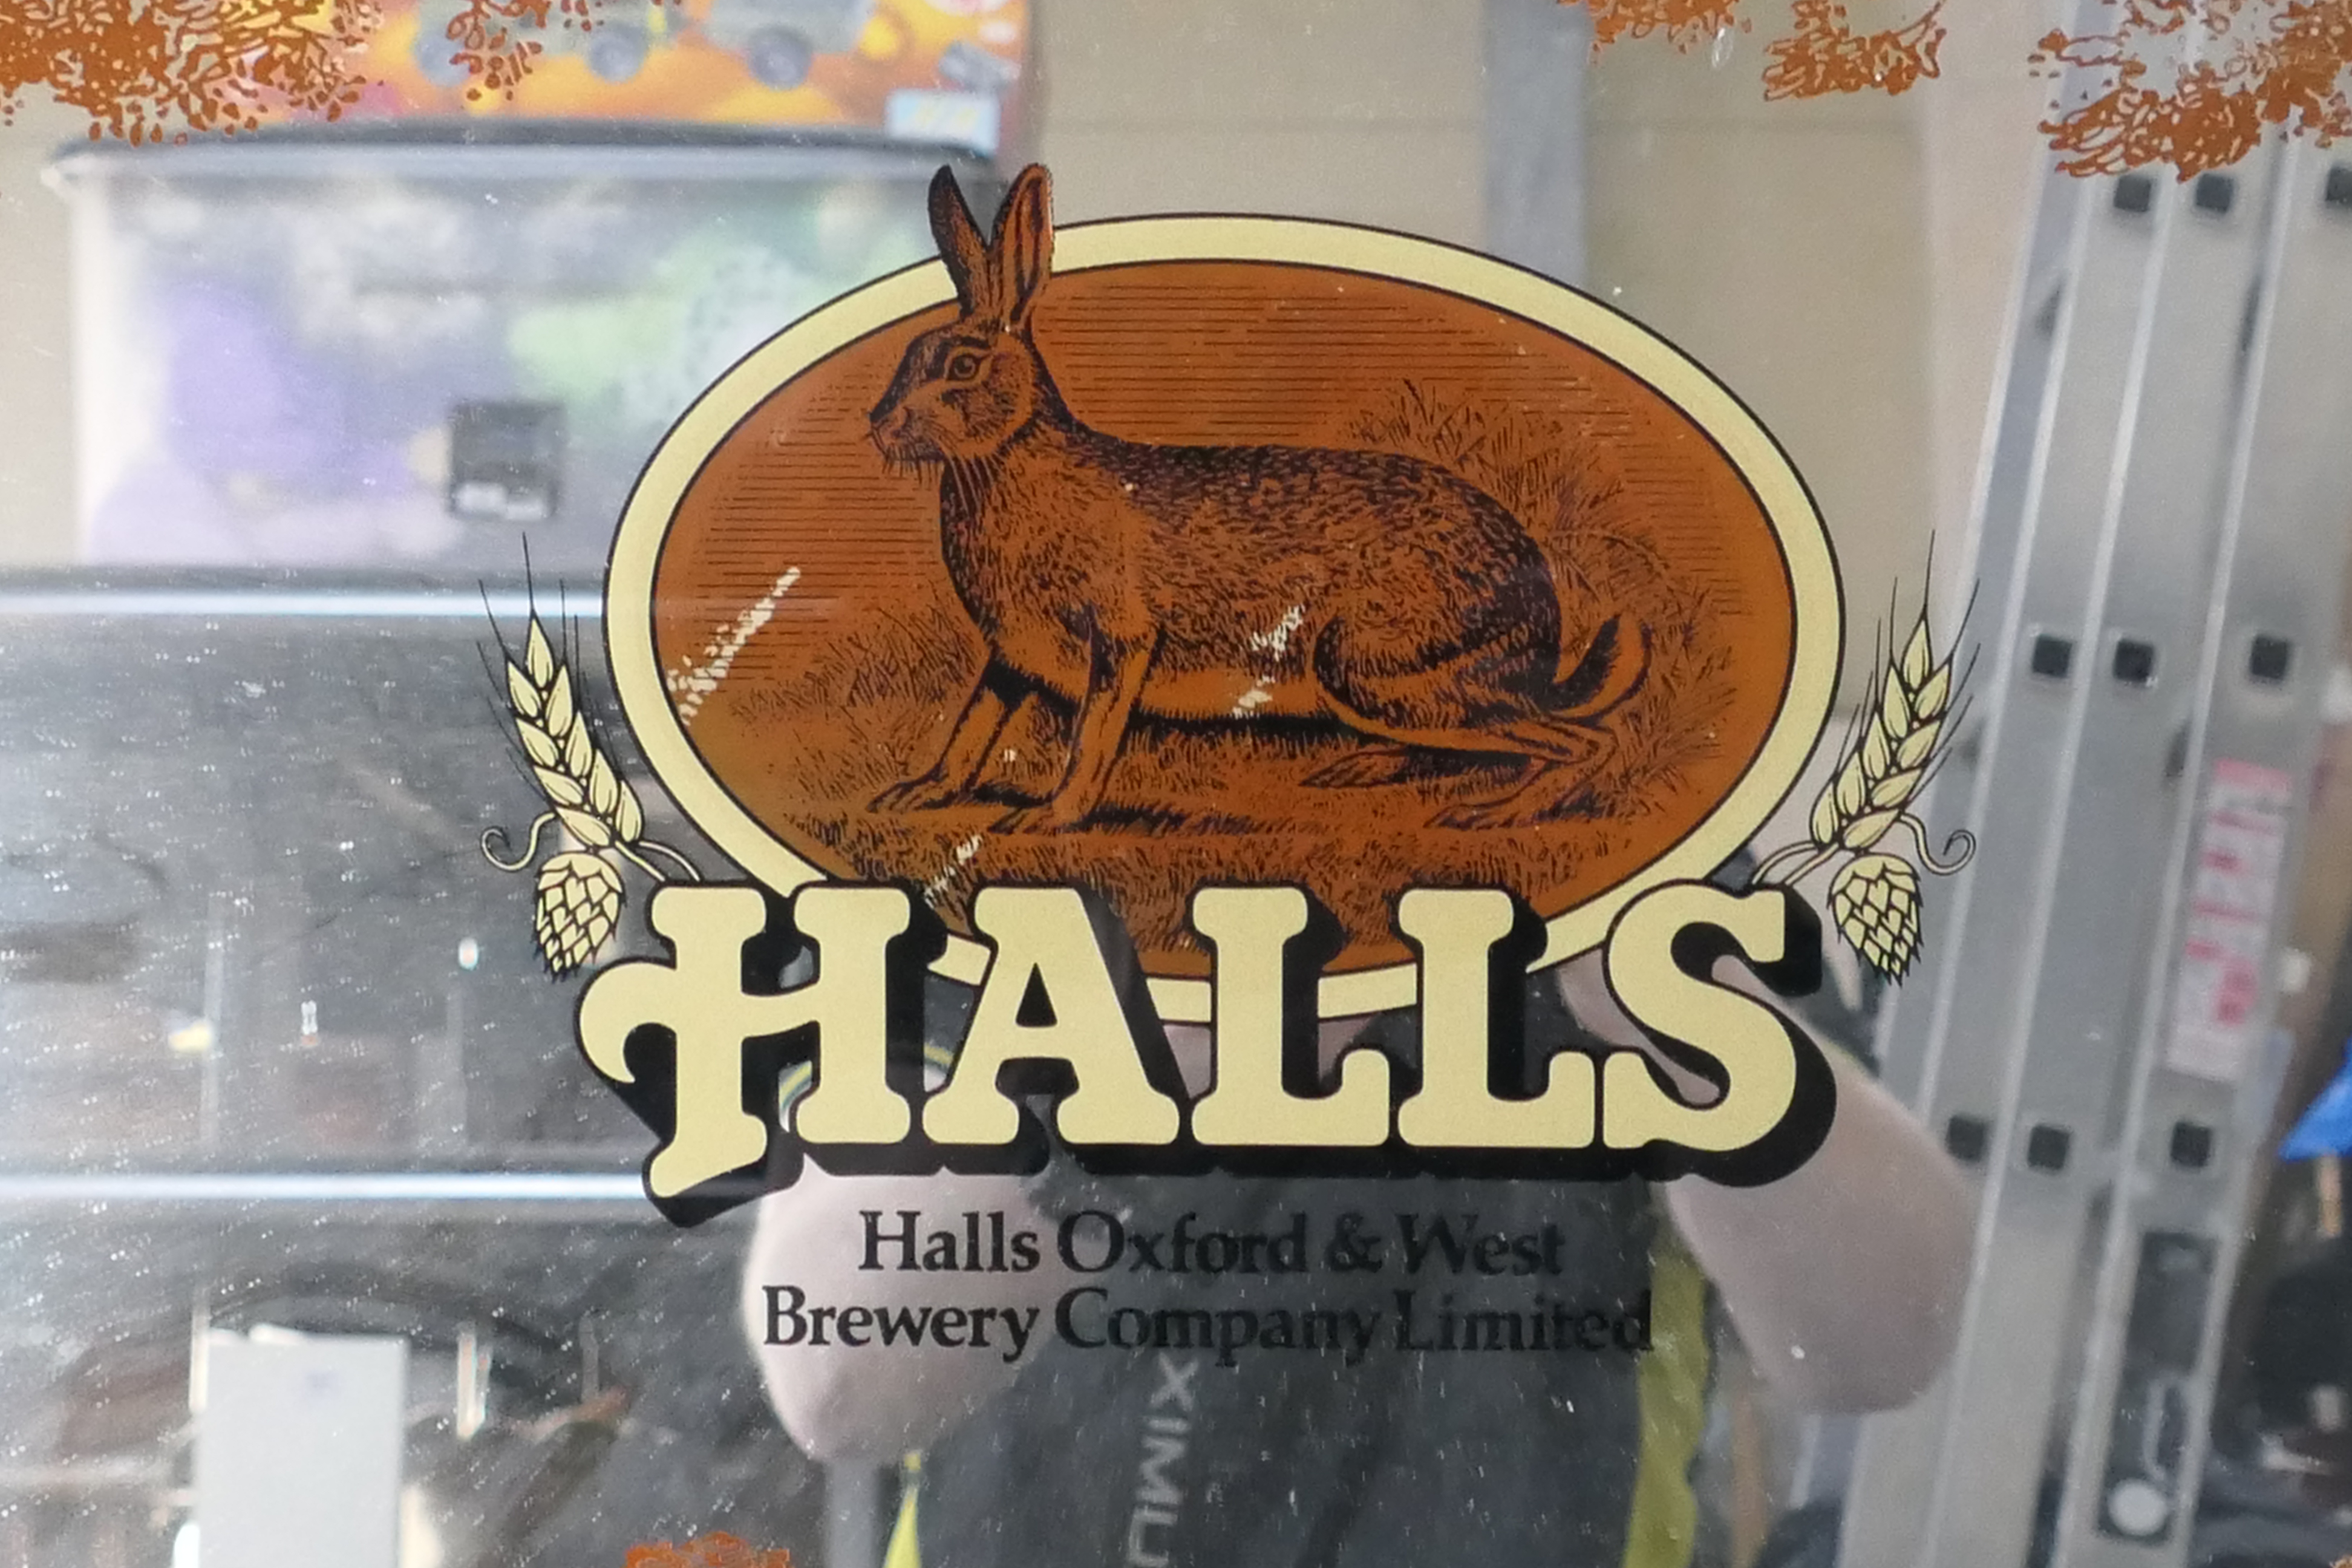 A Halls Oxford & West Brewery Company Limited advertising mirror, - Image 2 of 2